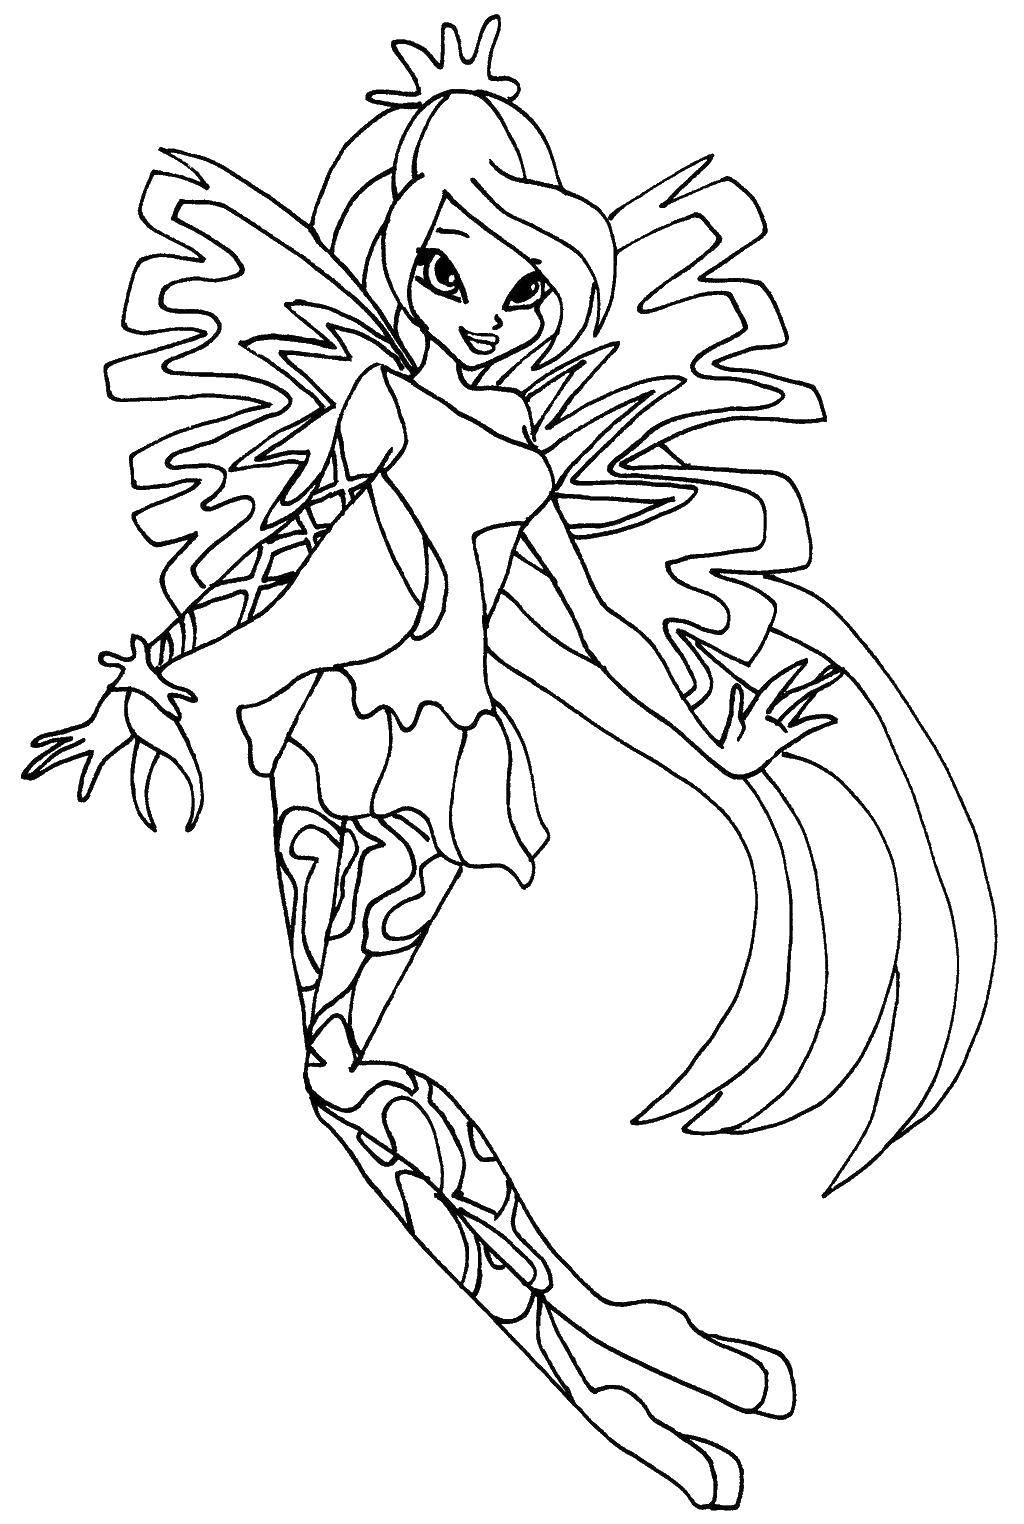 Coloring Bloom from winx club. Category Winx. Tags:  Winx Fairies, Bloom.